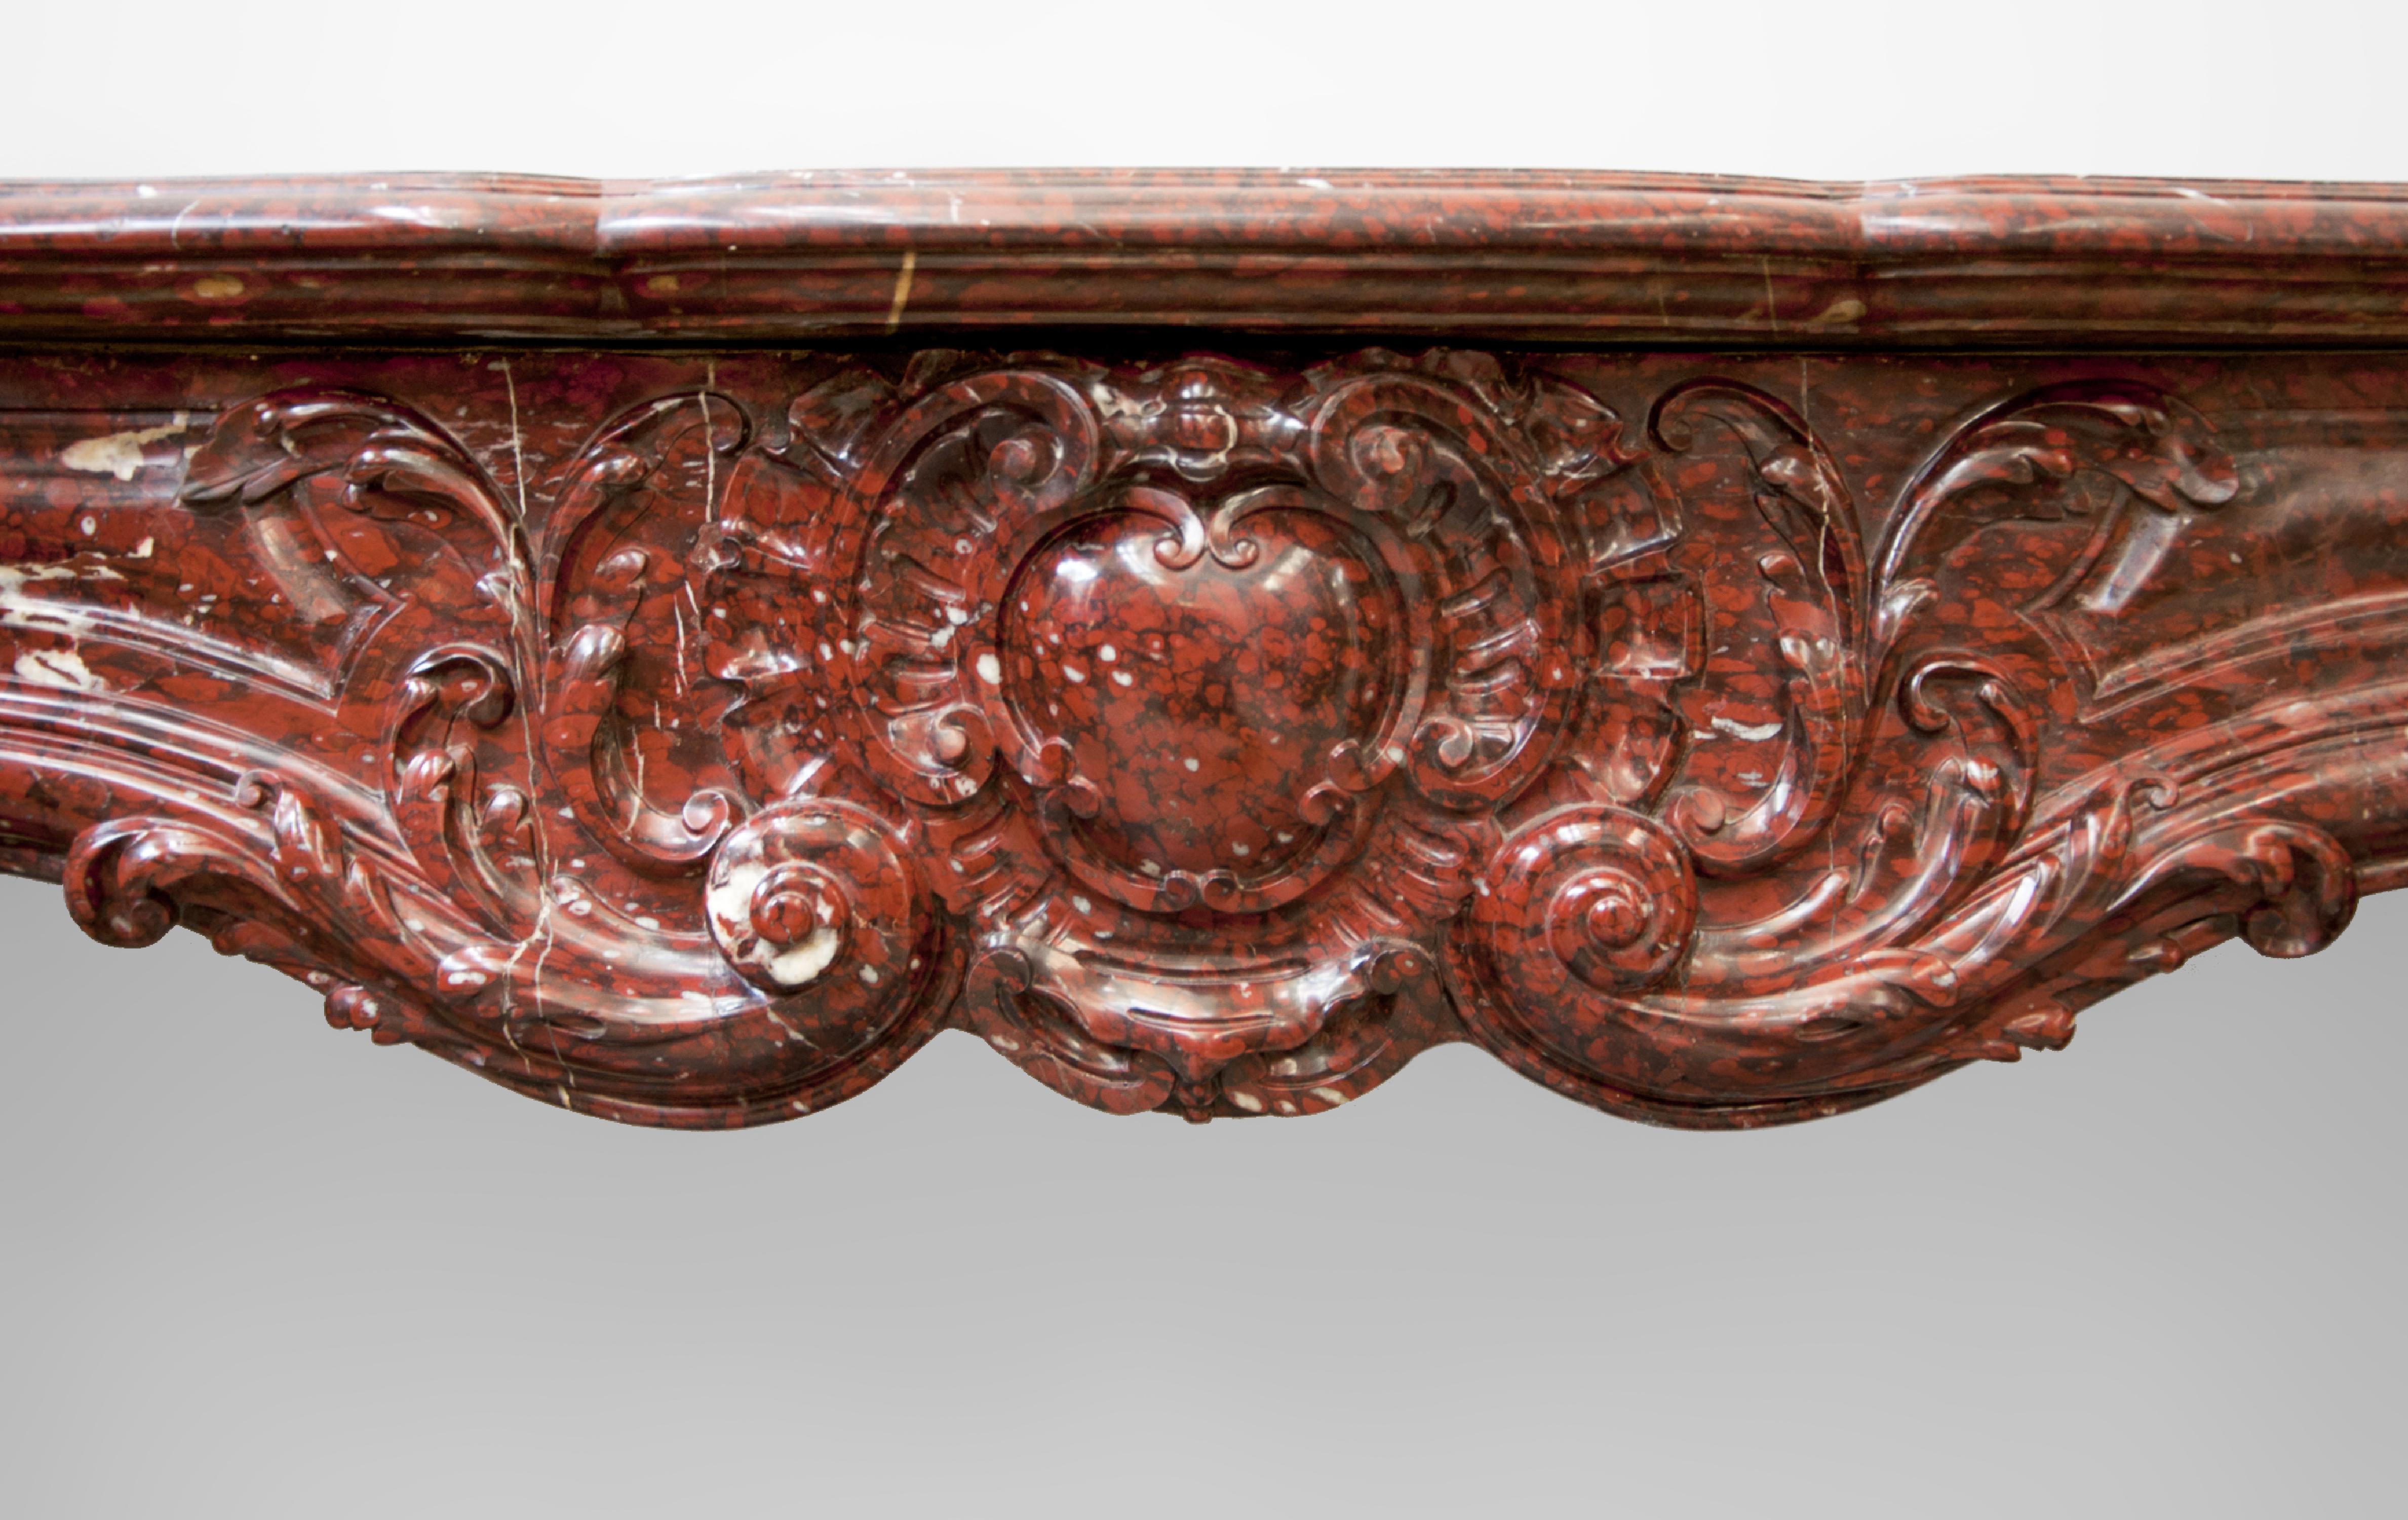 This beautiful antique Louis XV style fireplace was made out of Red Griotte marble during the 19th century. Extremely curved and decorated with fleshy sculptures, this fireplace is made in one of the finest French marbles, Red Griotte whose career